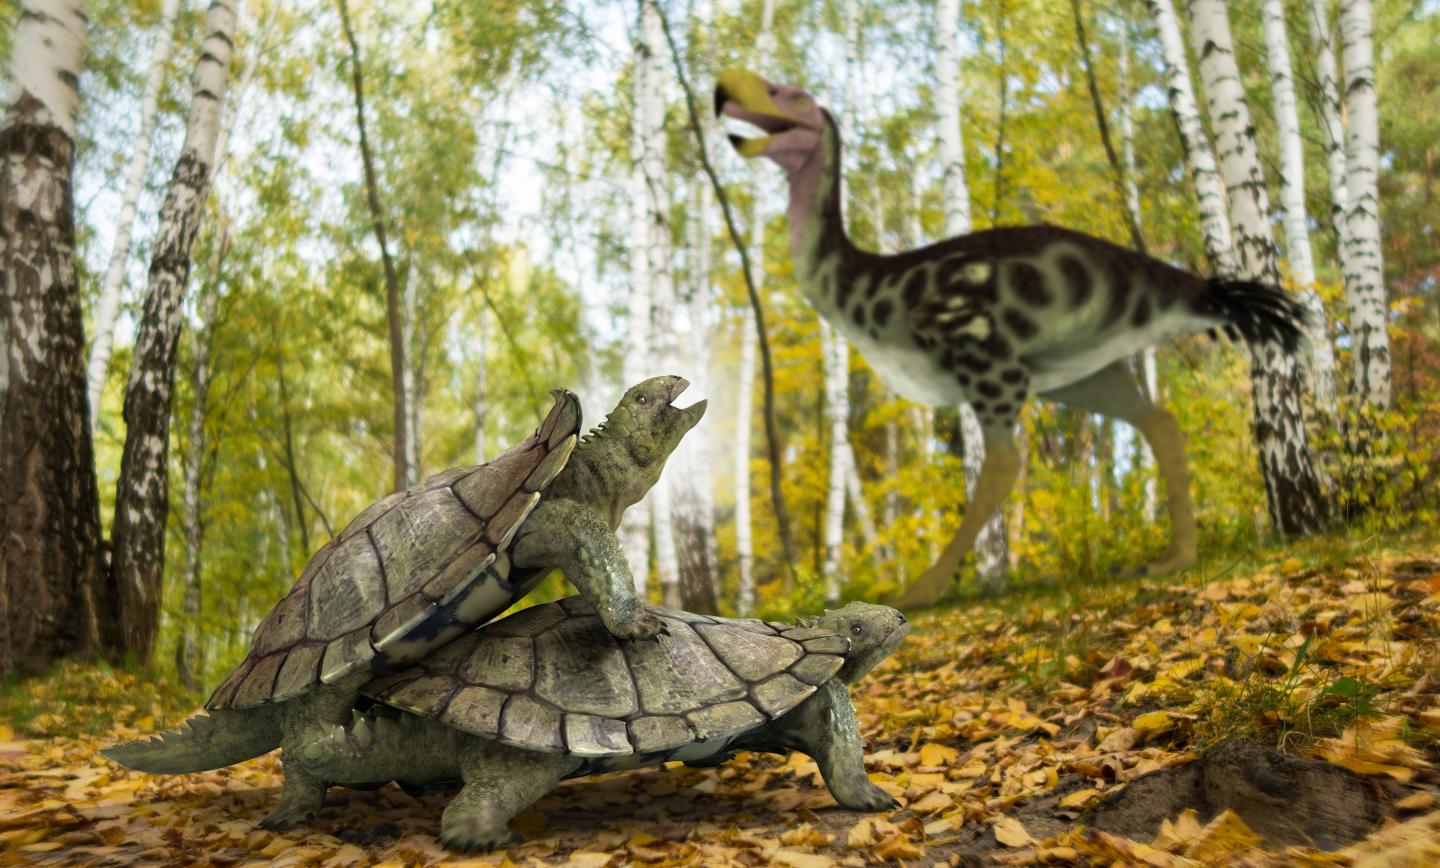 One Single Primitive Turtle Resisted Mass Extinction in the Northern Hemisphere